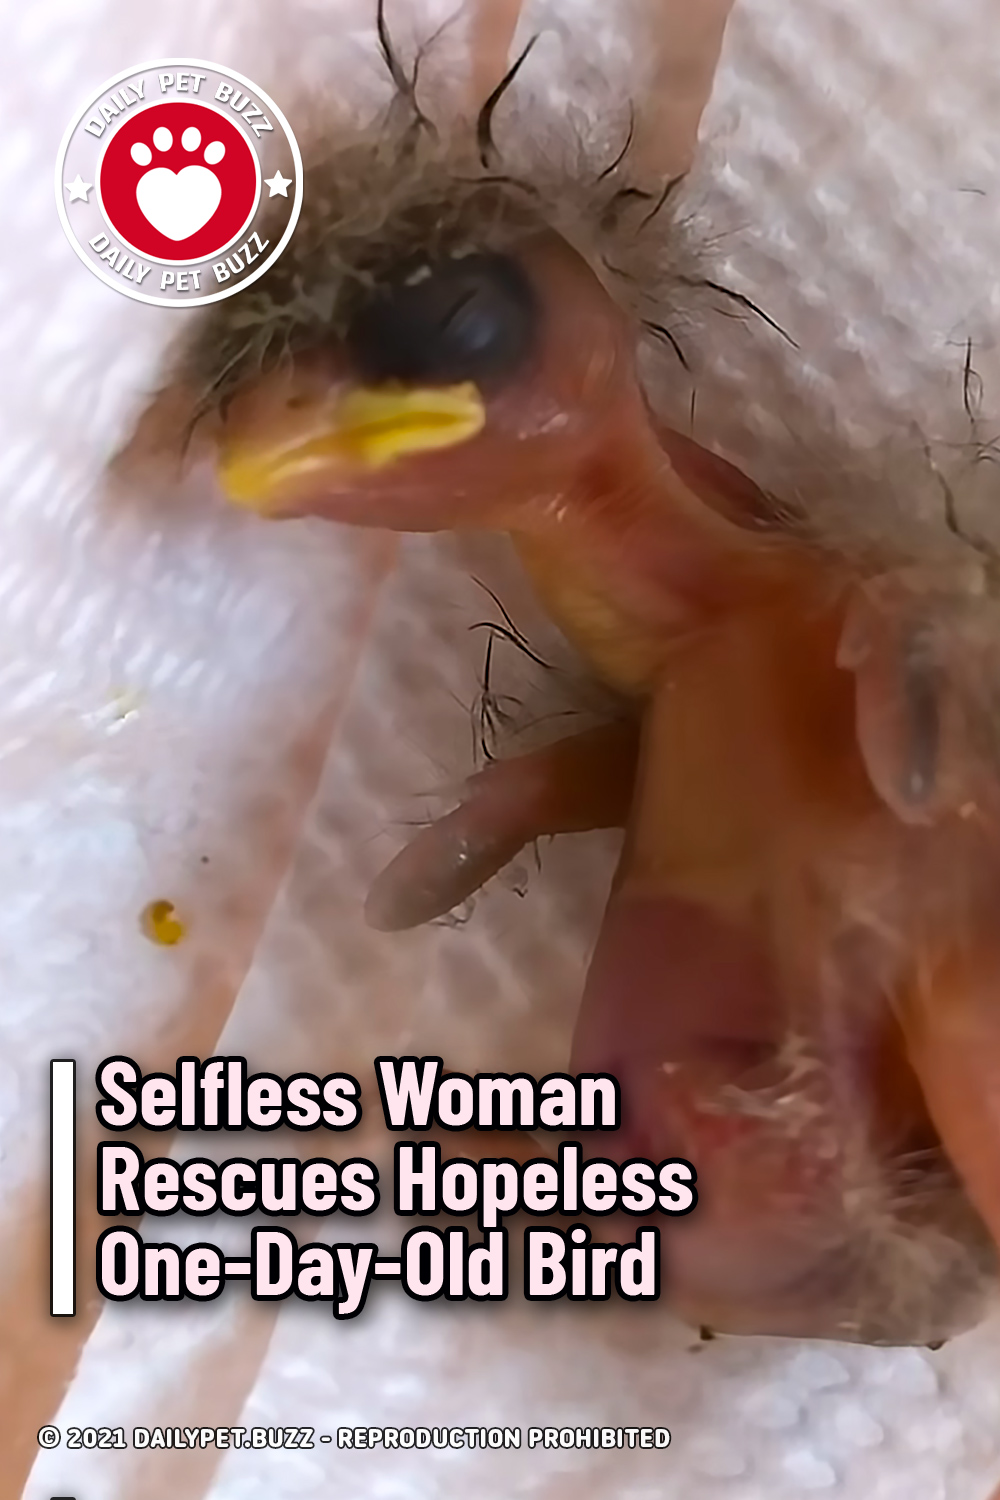 Selfless Woman Rescues Hopeless One-Day-Old Bird